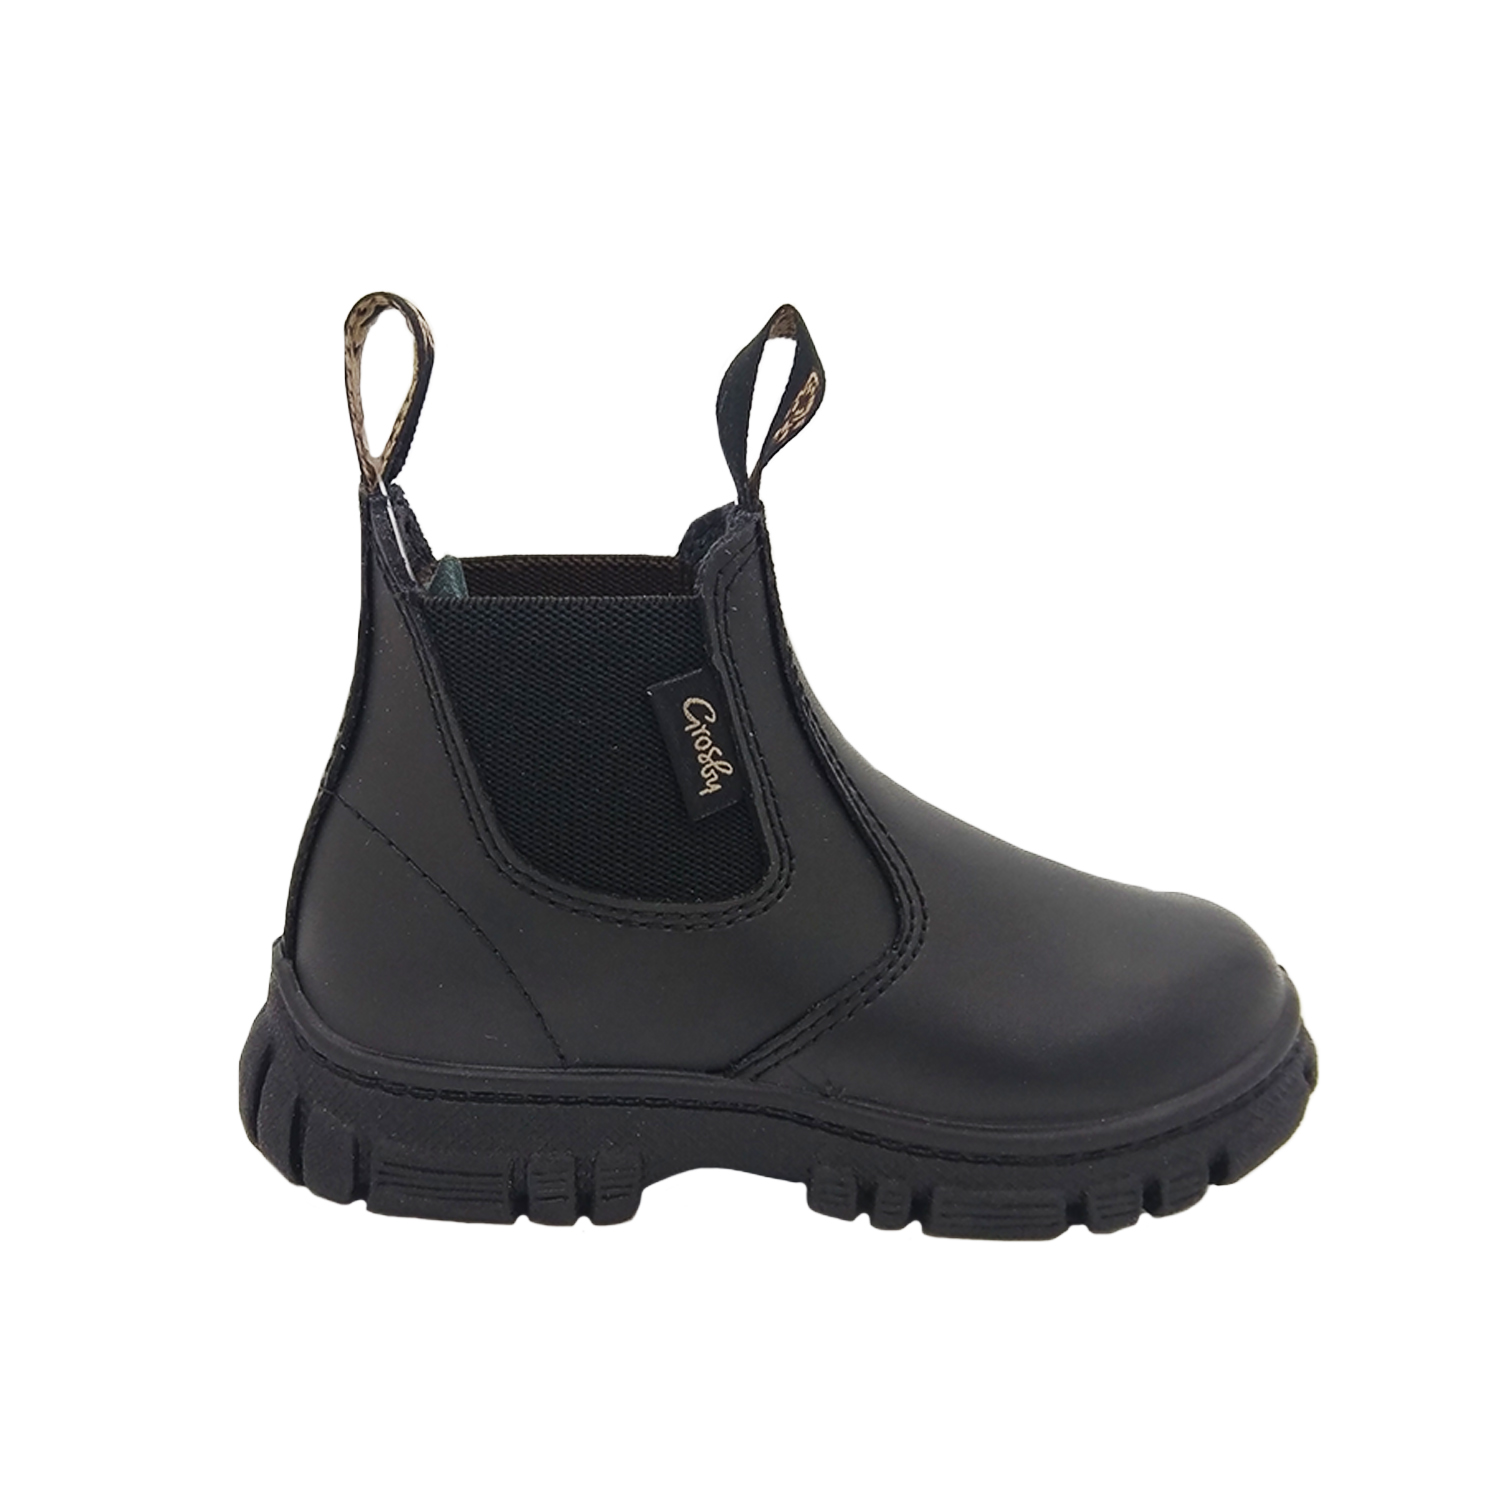 Toddler Boots Grosby Ranch Black Or 